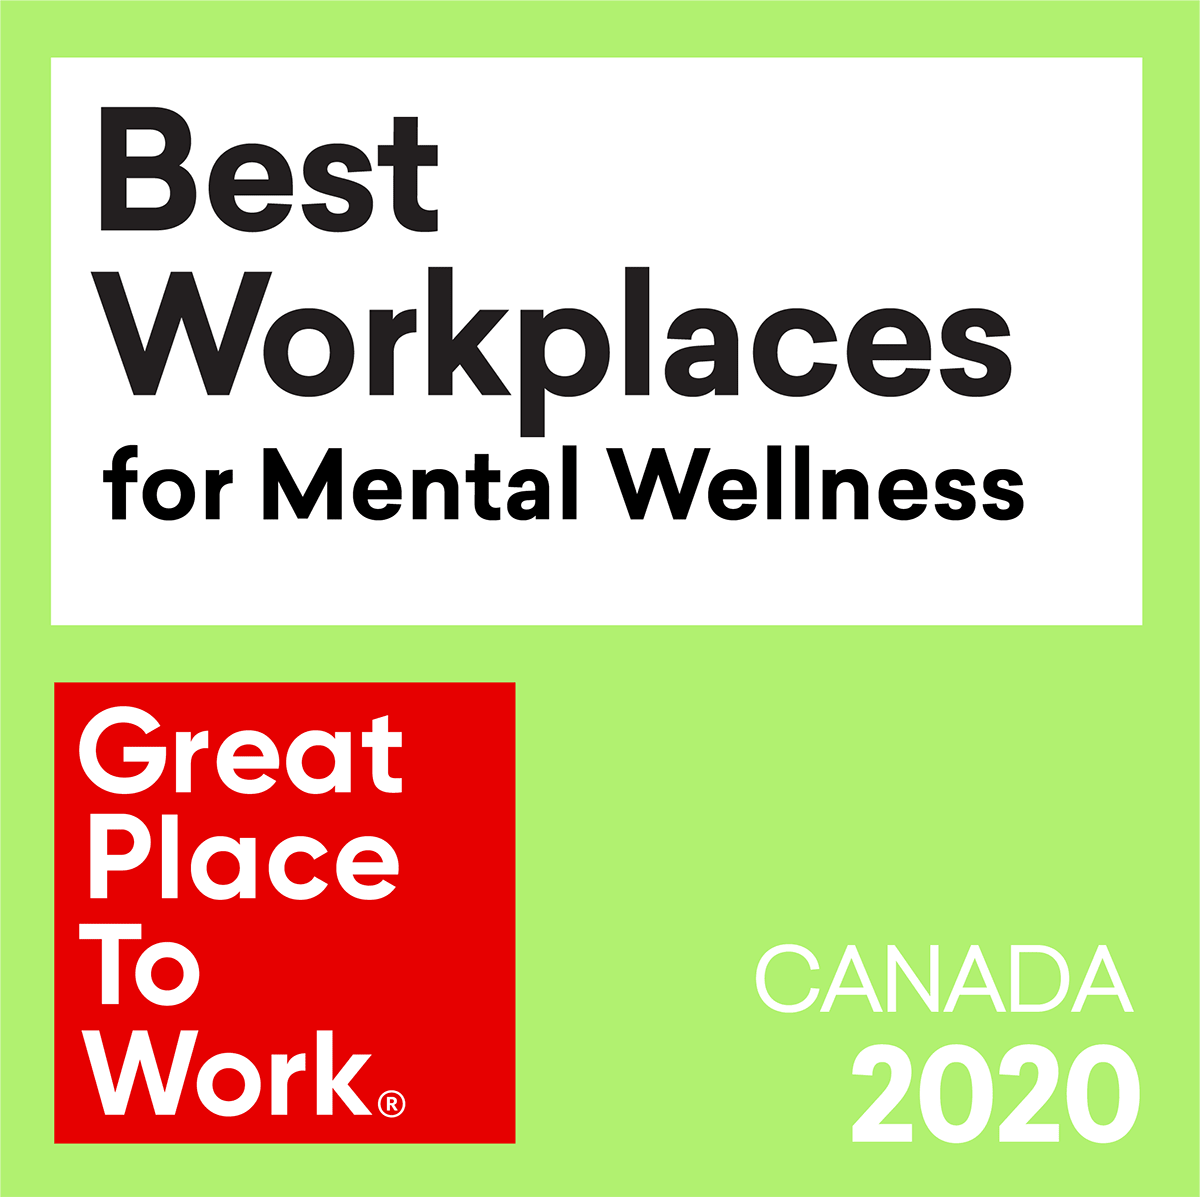 Great Place To Work 2020: Mental Wellness